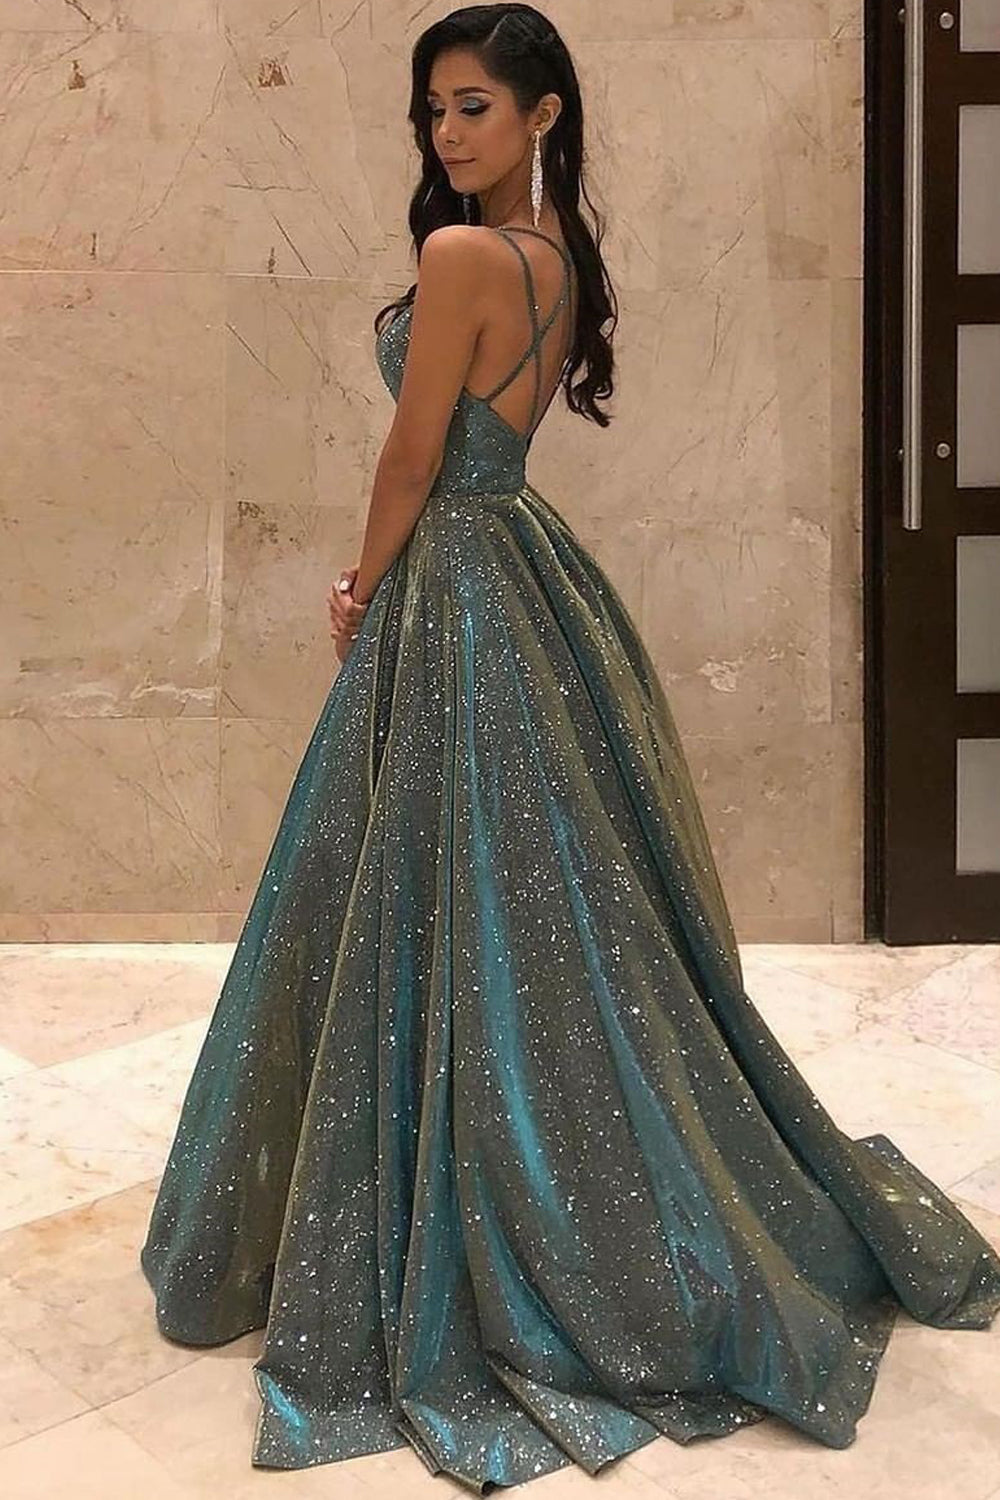 Sparkly Ball Gown Spaghetti Straps Prom Dress Backless Evening Dress,WP057